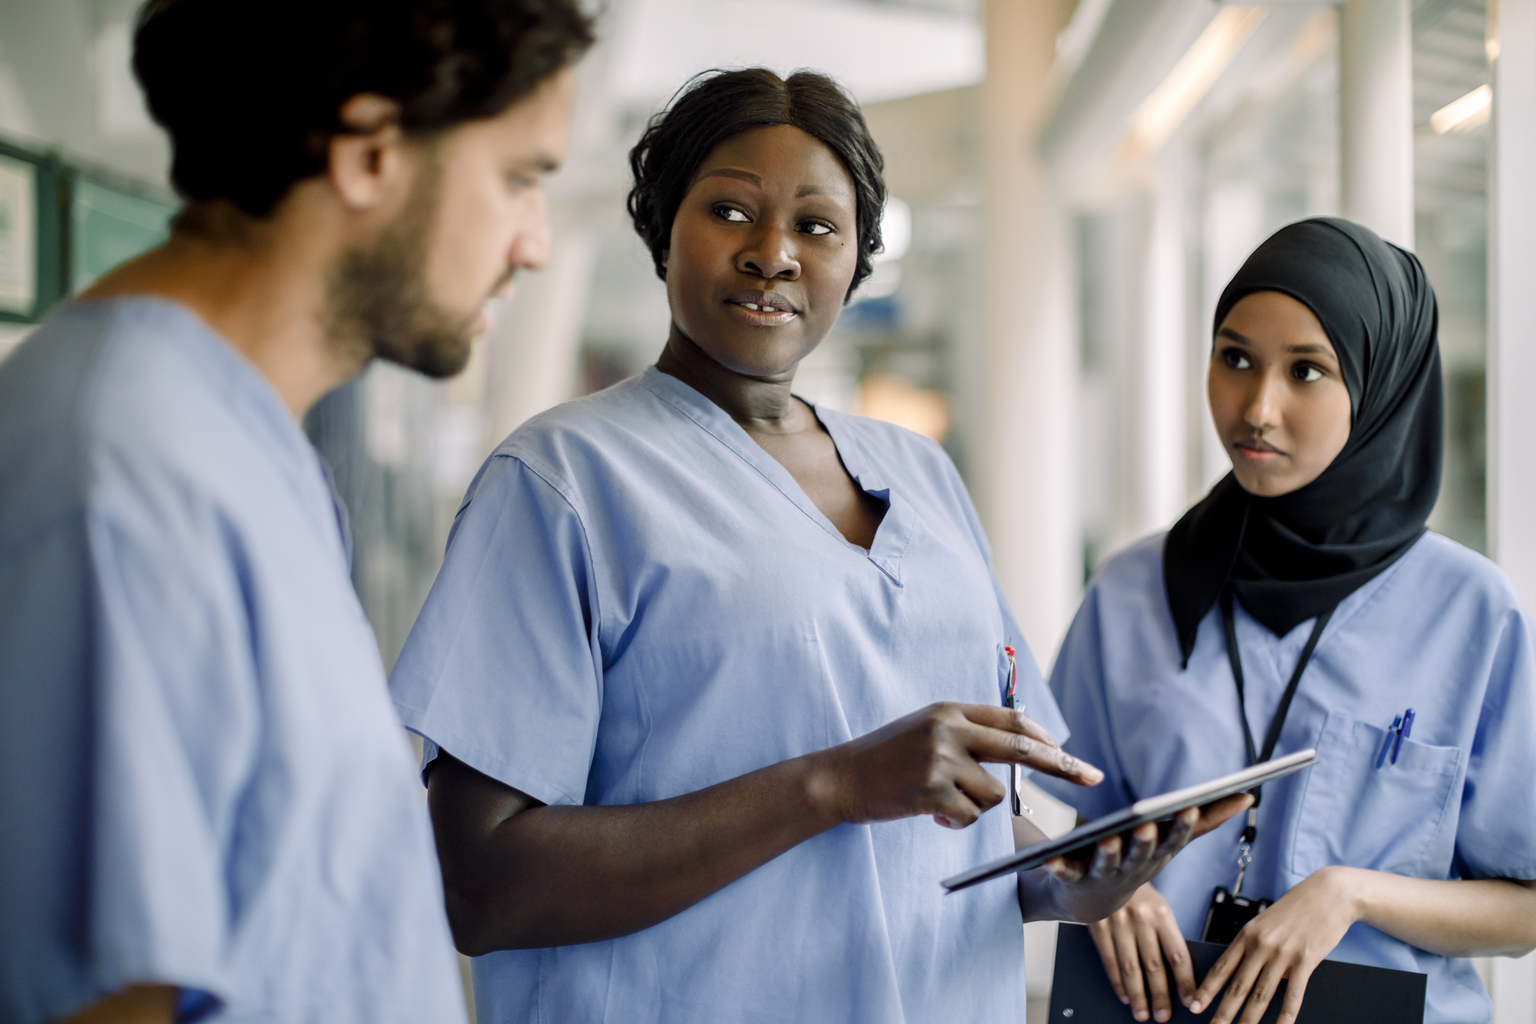 How academia and practice can partner to prepare new nurses